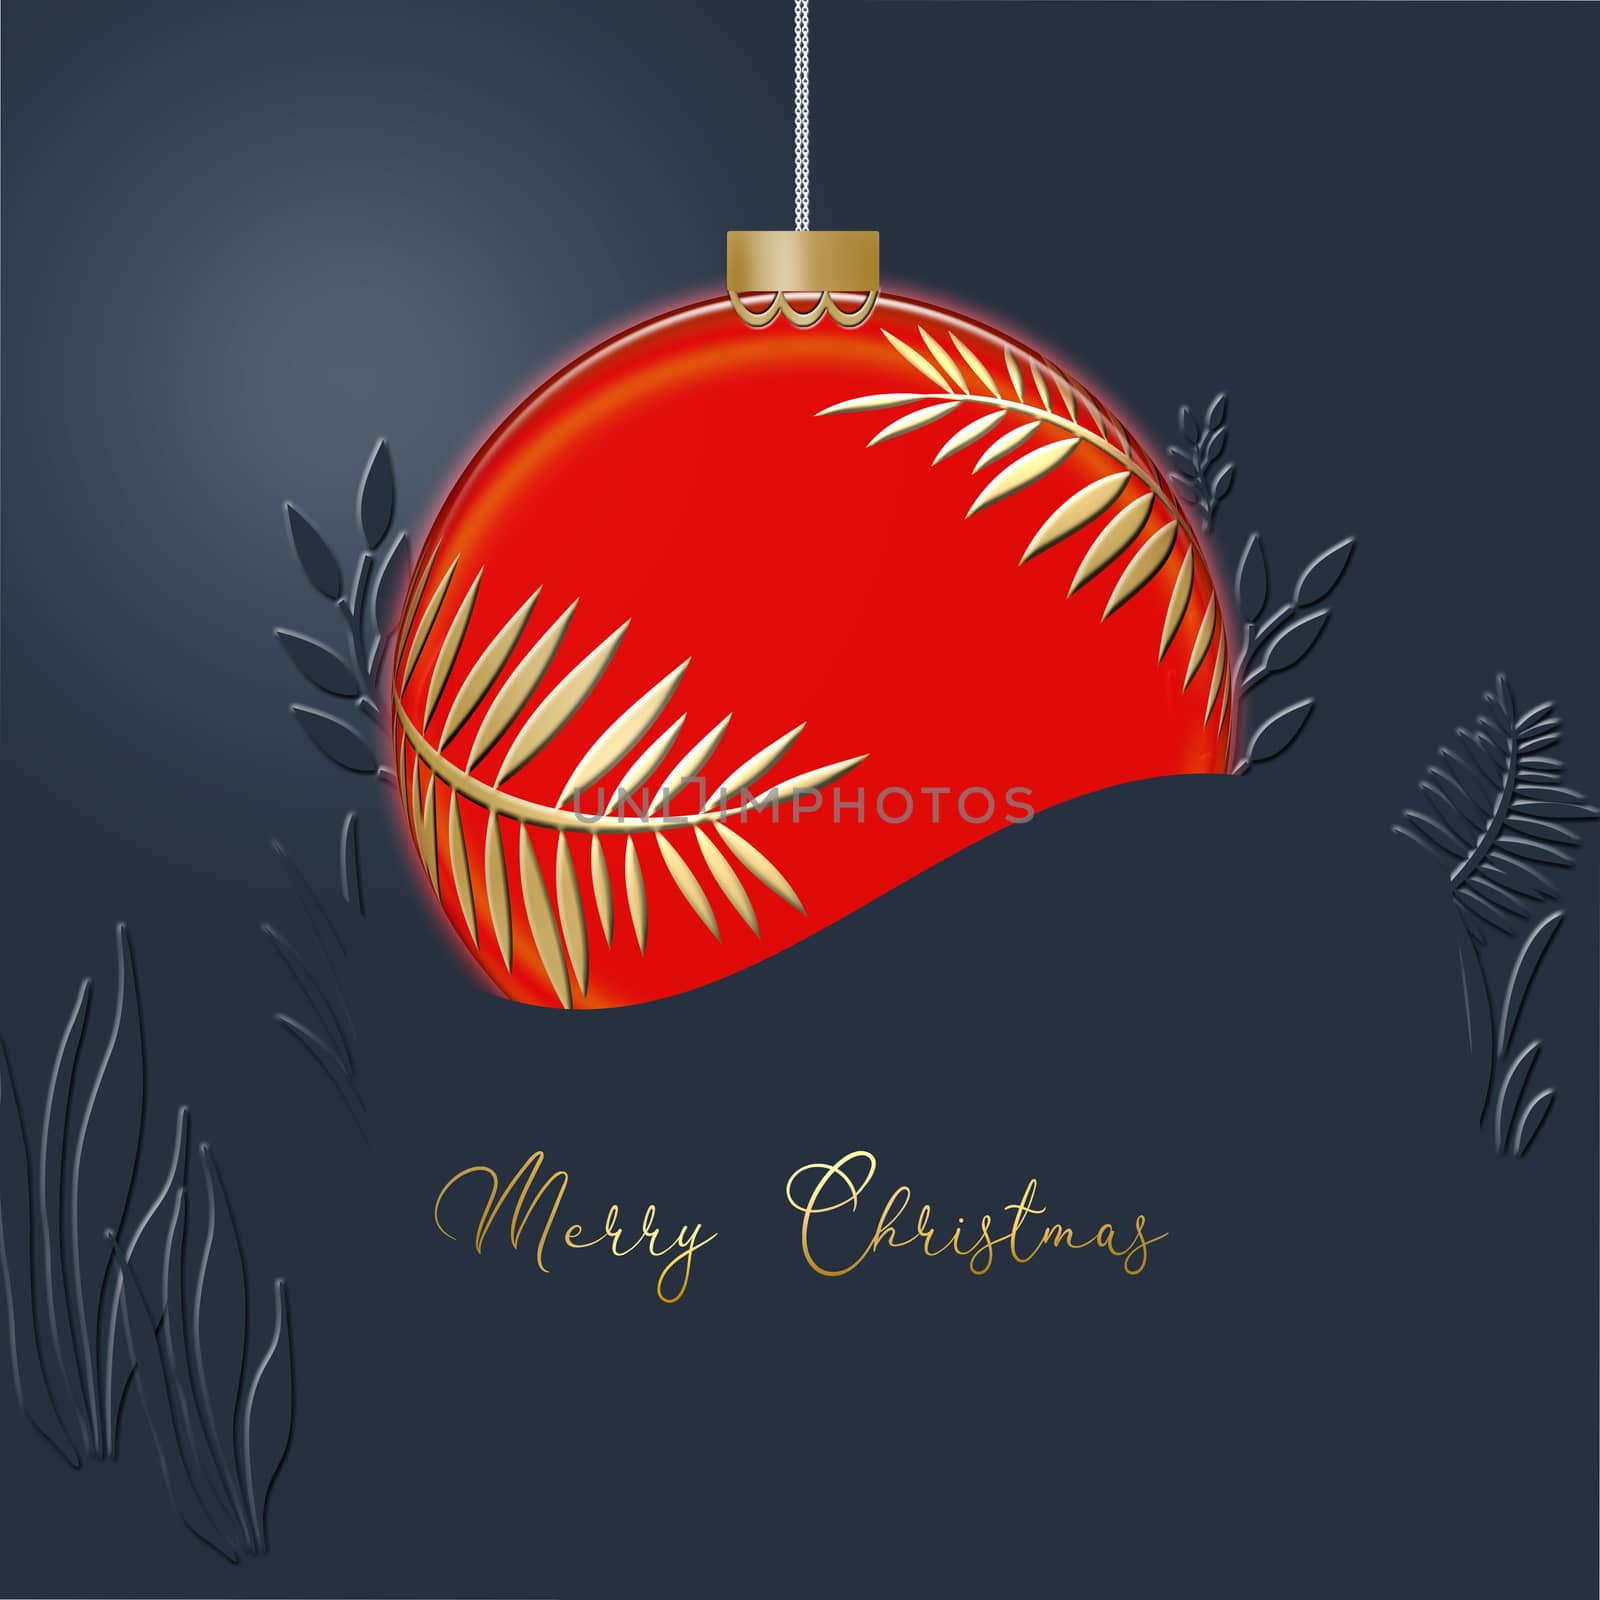 Hanging red Christmas ball made of gold leaves on blue background. Minimalist greeting 2021 New Year card. Gold text Merry Christmas. 3D illustration